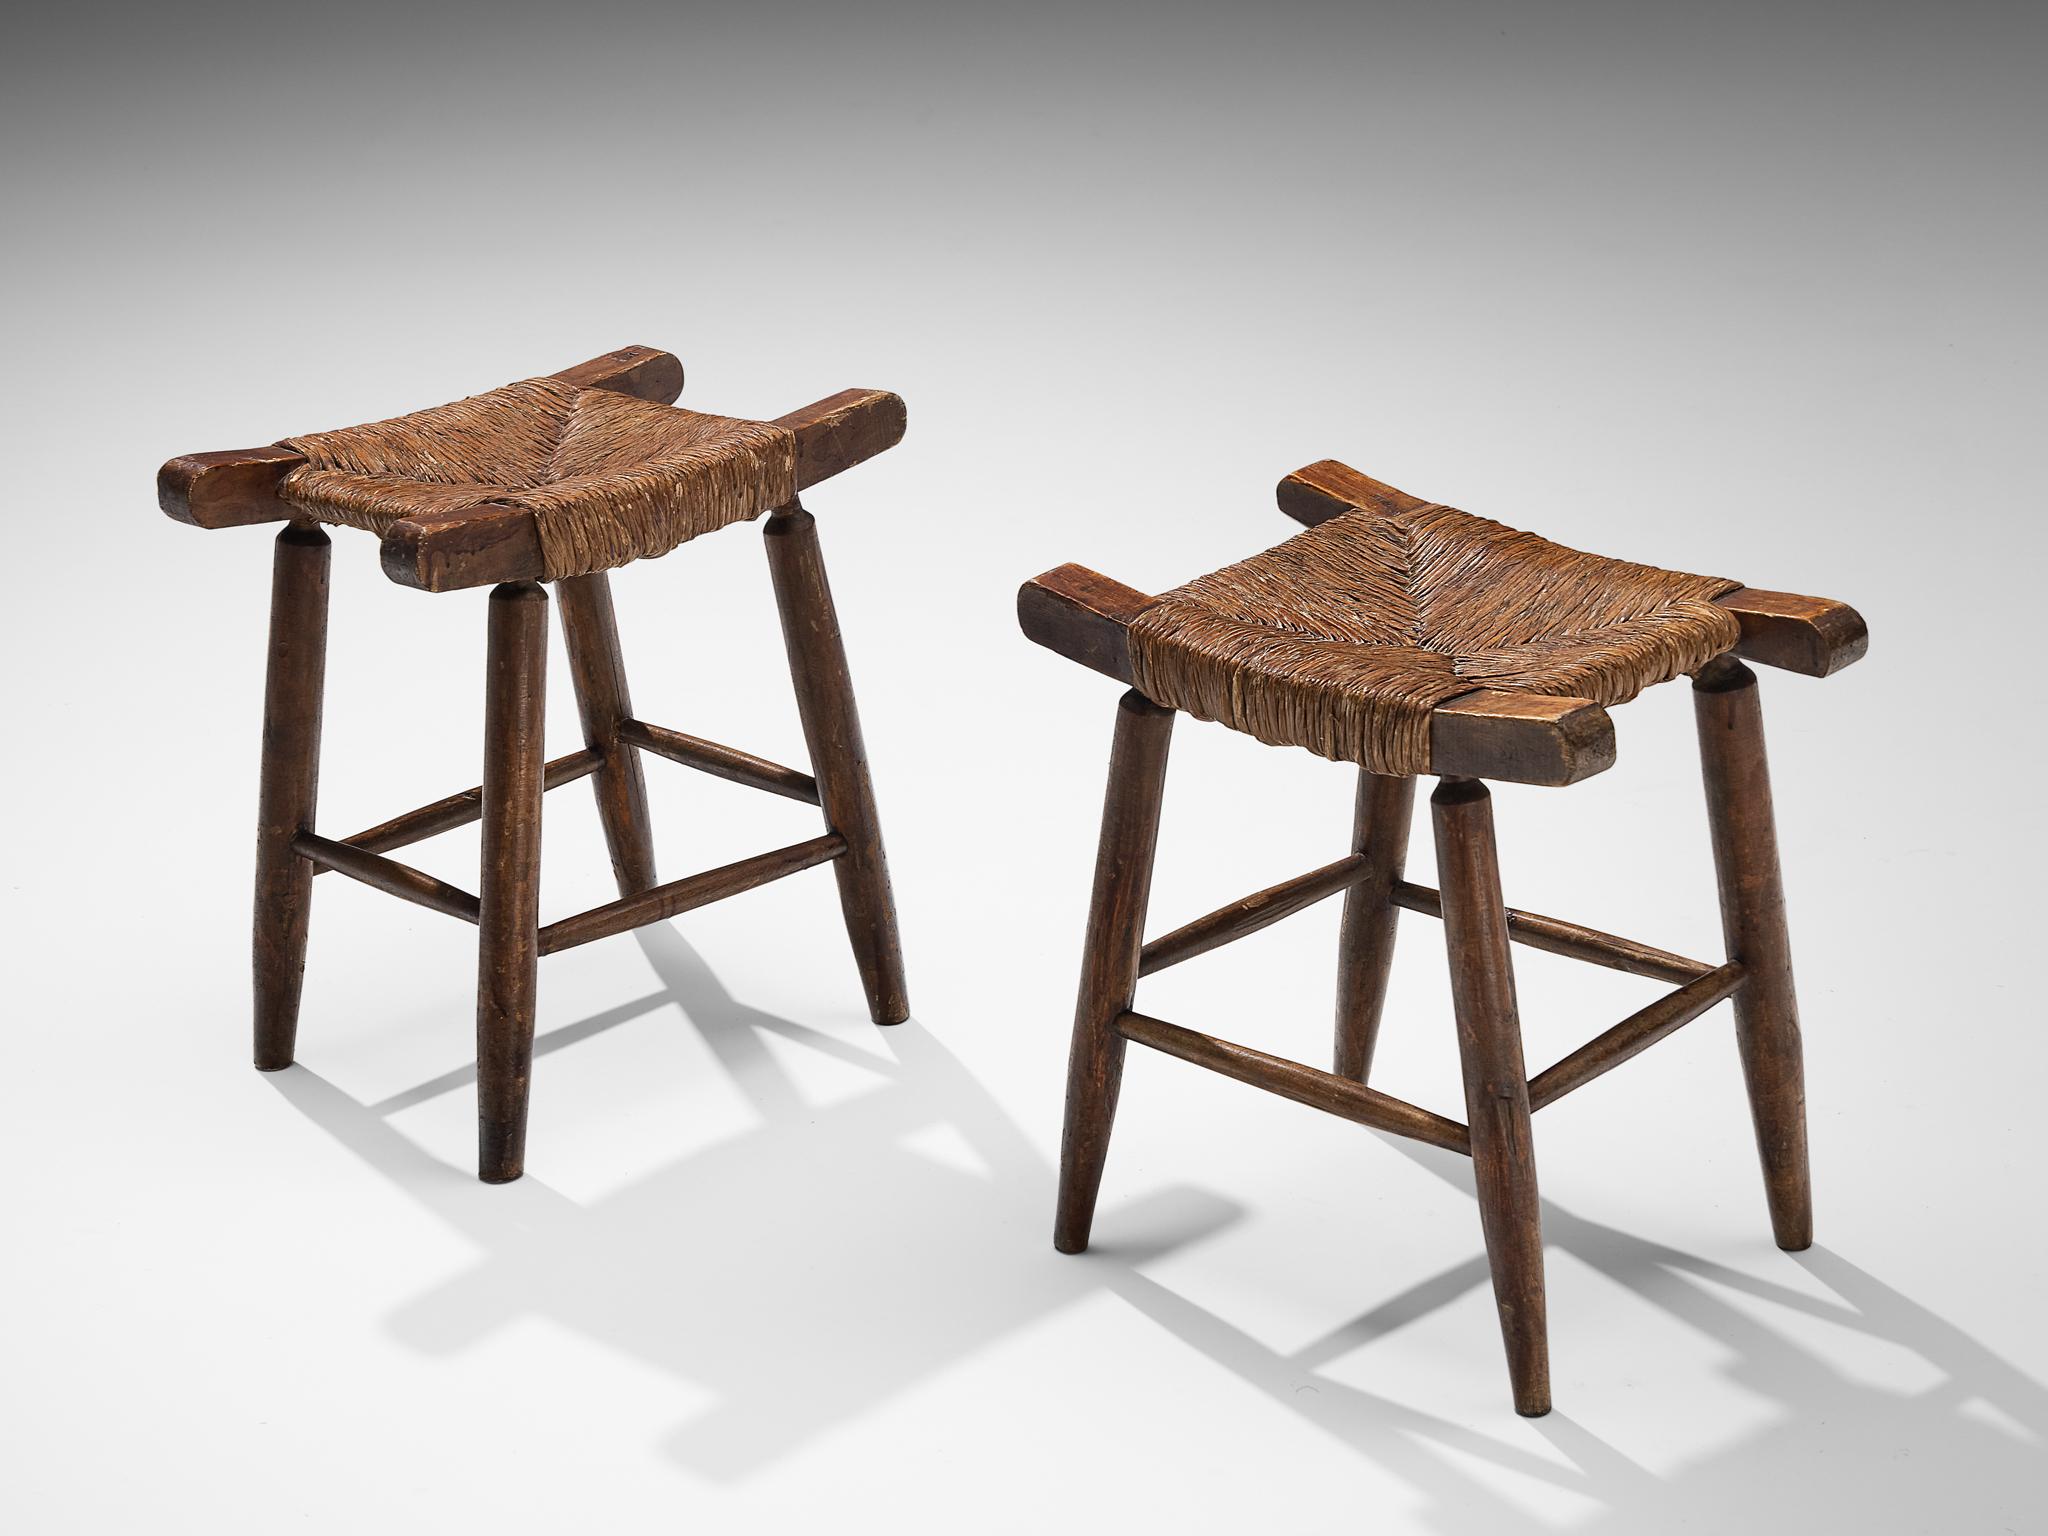 Stools, stained beech, straw, Spain, 1950s.

This piece of furniture embodies an evolved provincial character with great quality of elegance. The sincere construction and type of upholstery, give the chair a character of its own. The seat features